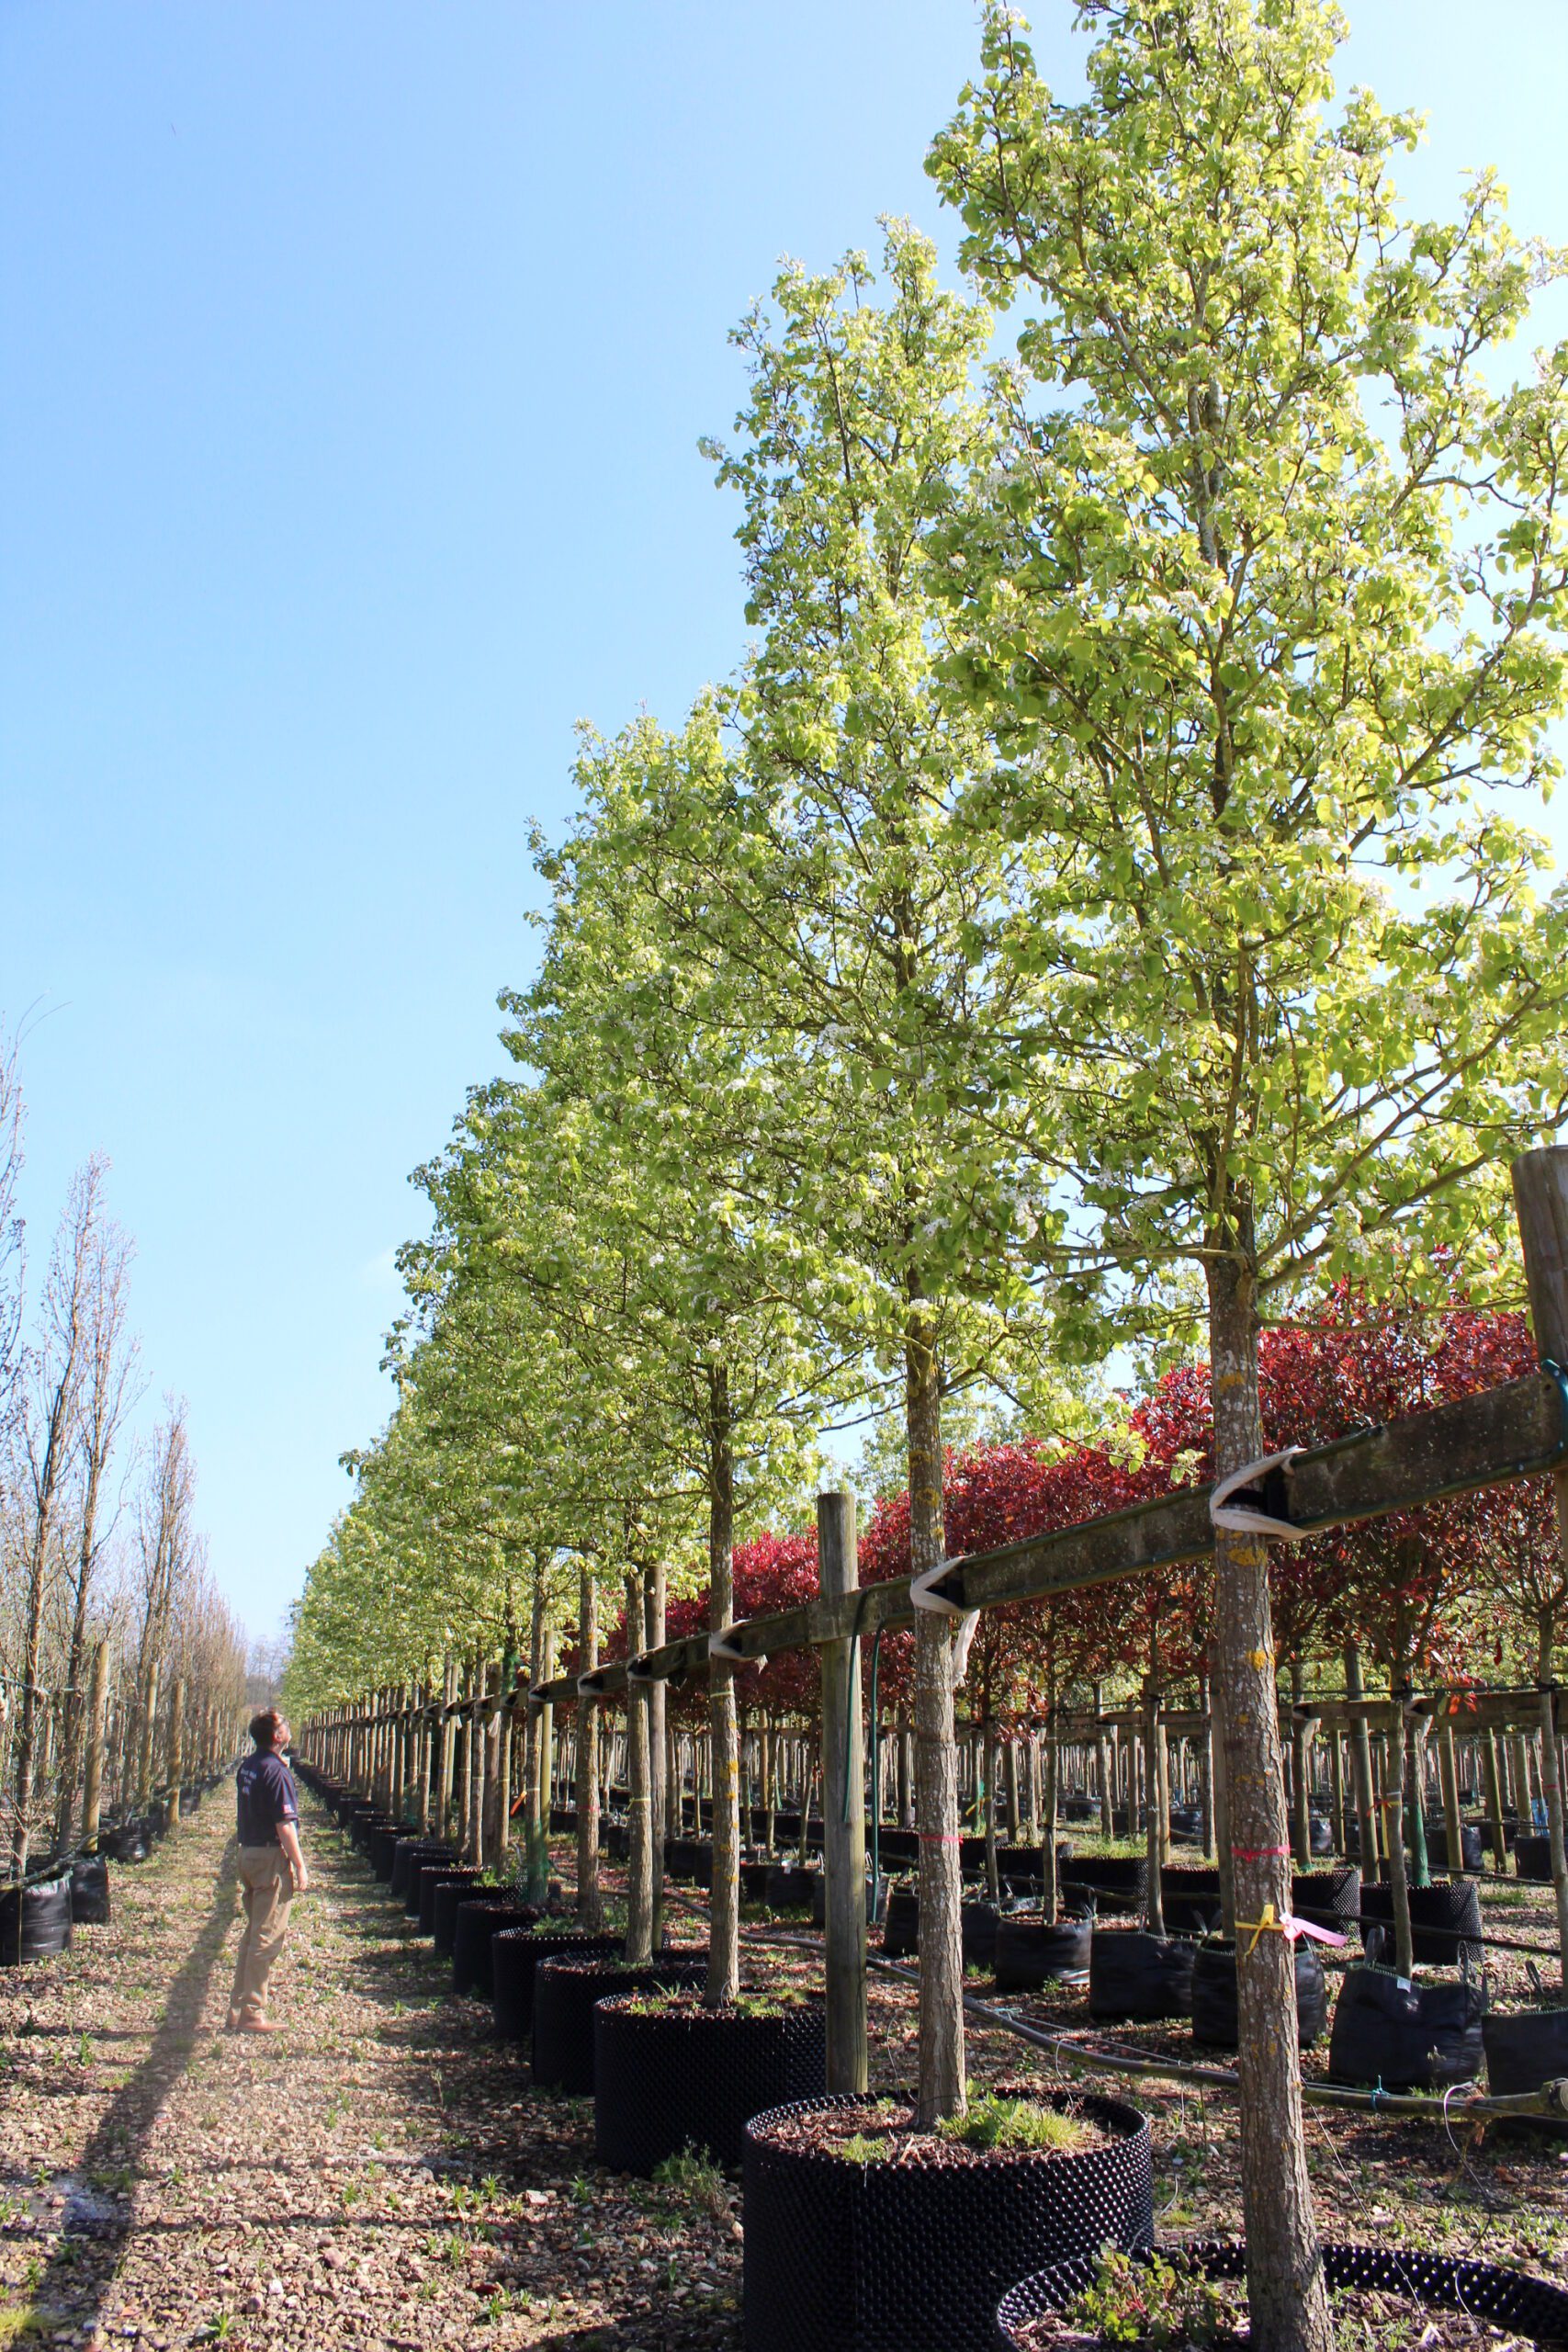 Pryus calleryana Chanticleer trees in blossom growing in rows in containers